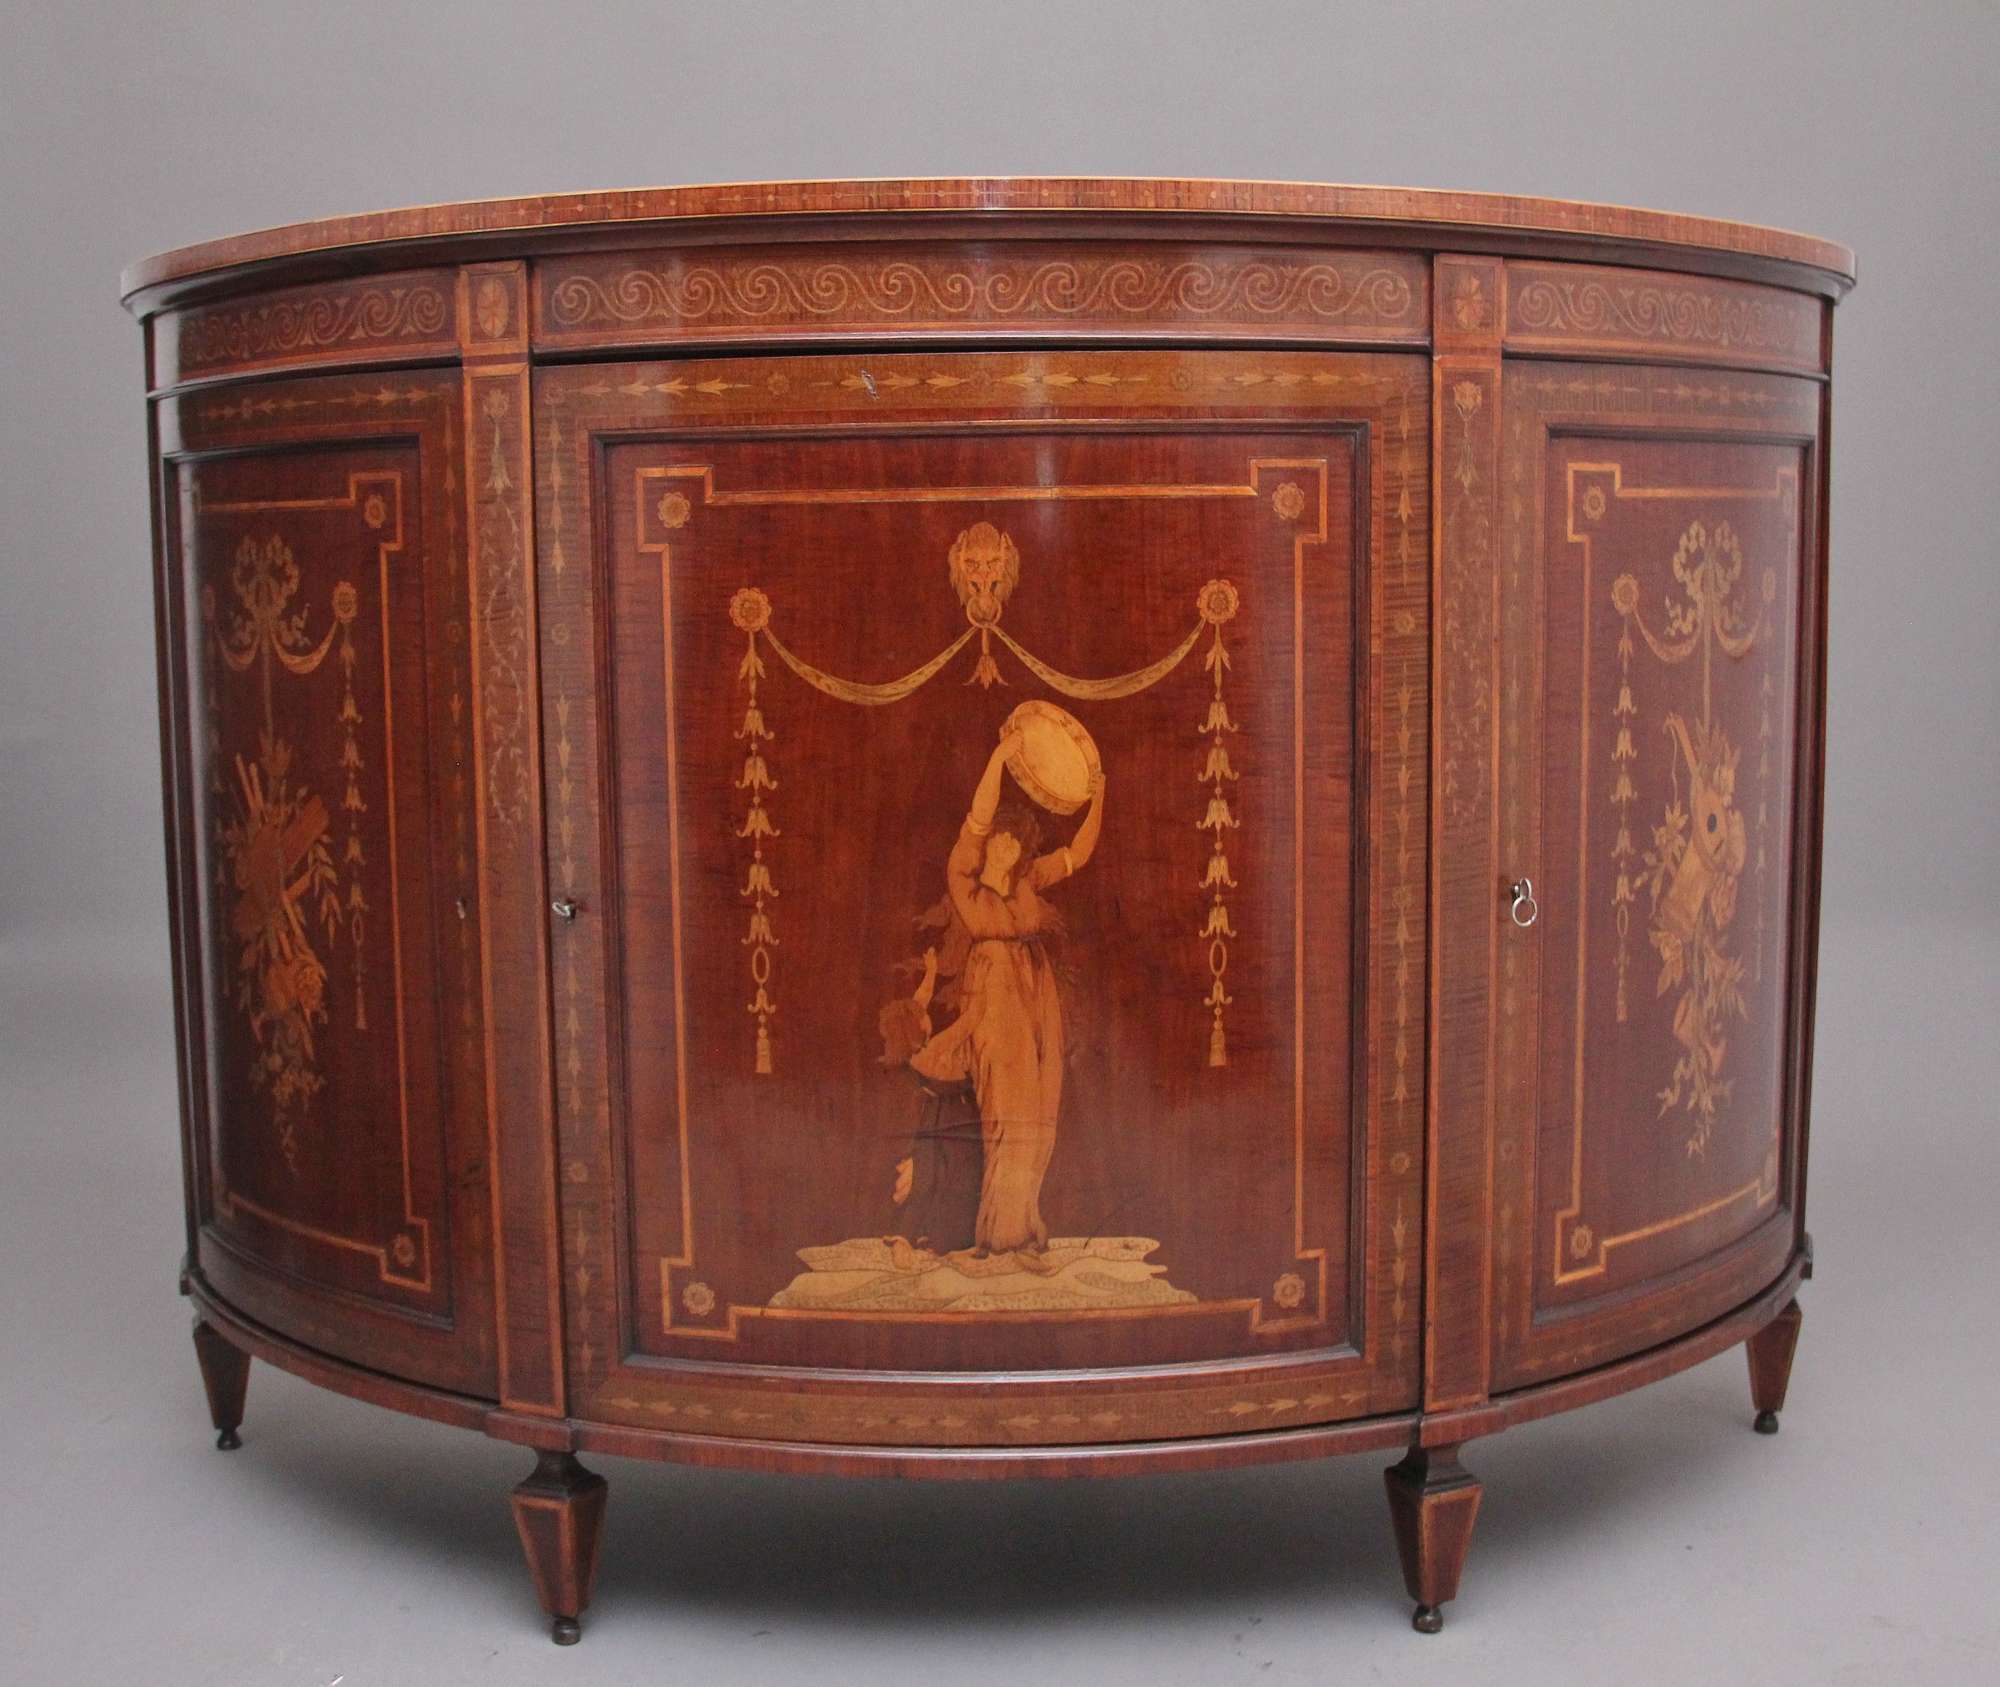 Fabulous Quality 19th Century Mahogany And Inlaid Cabinet